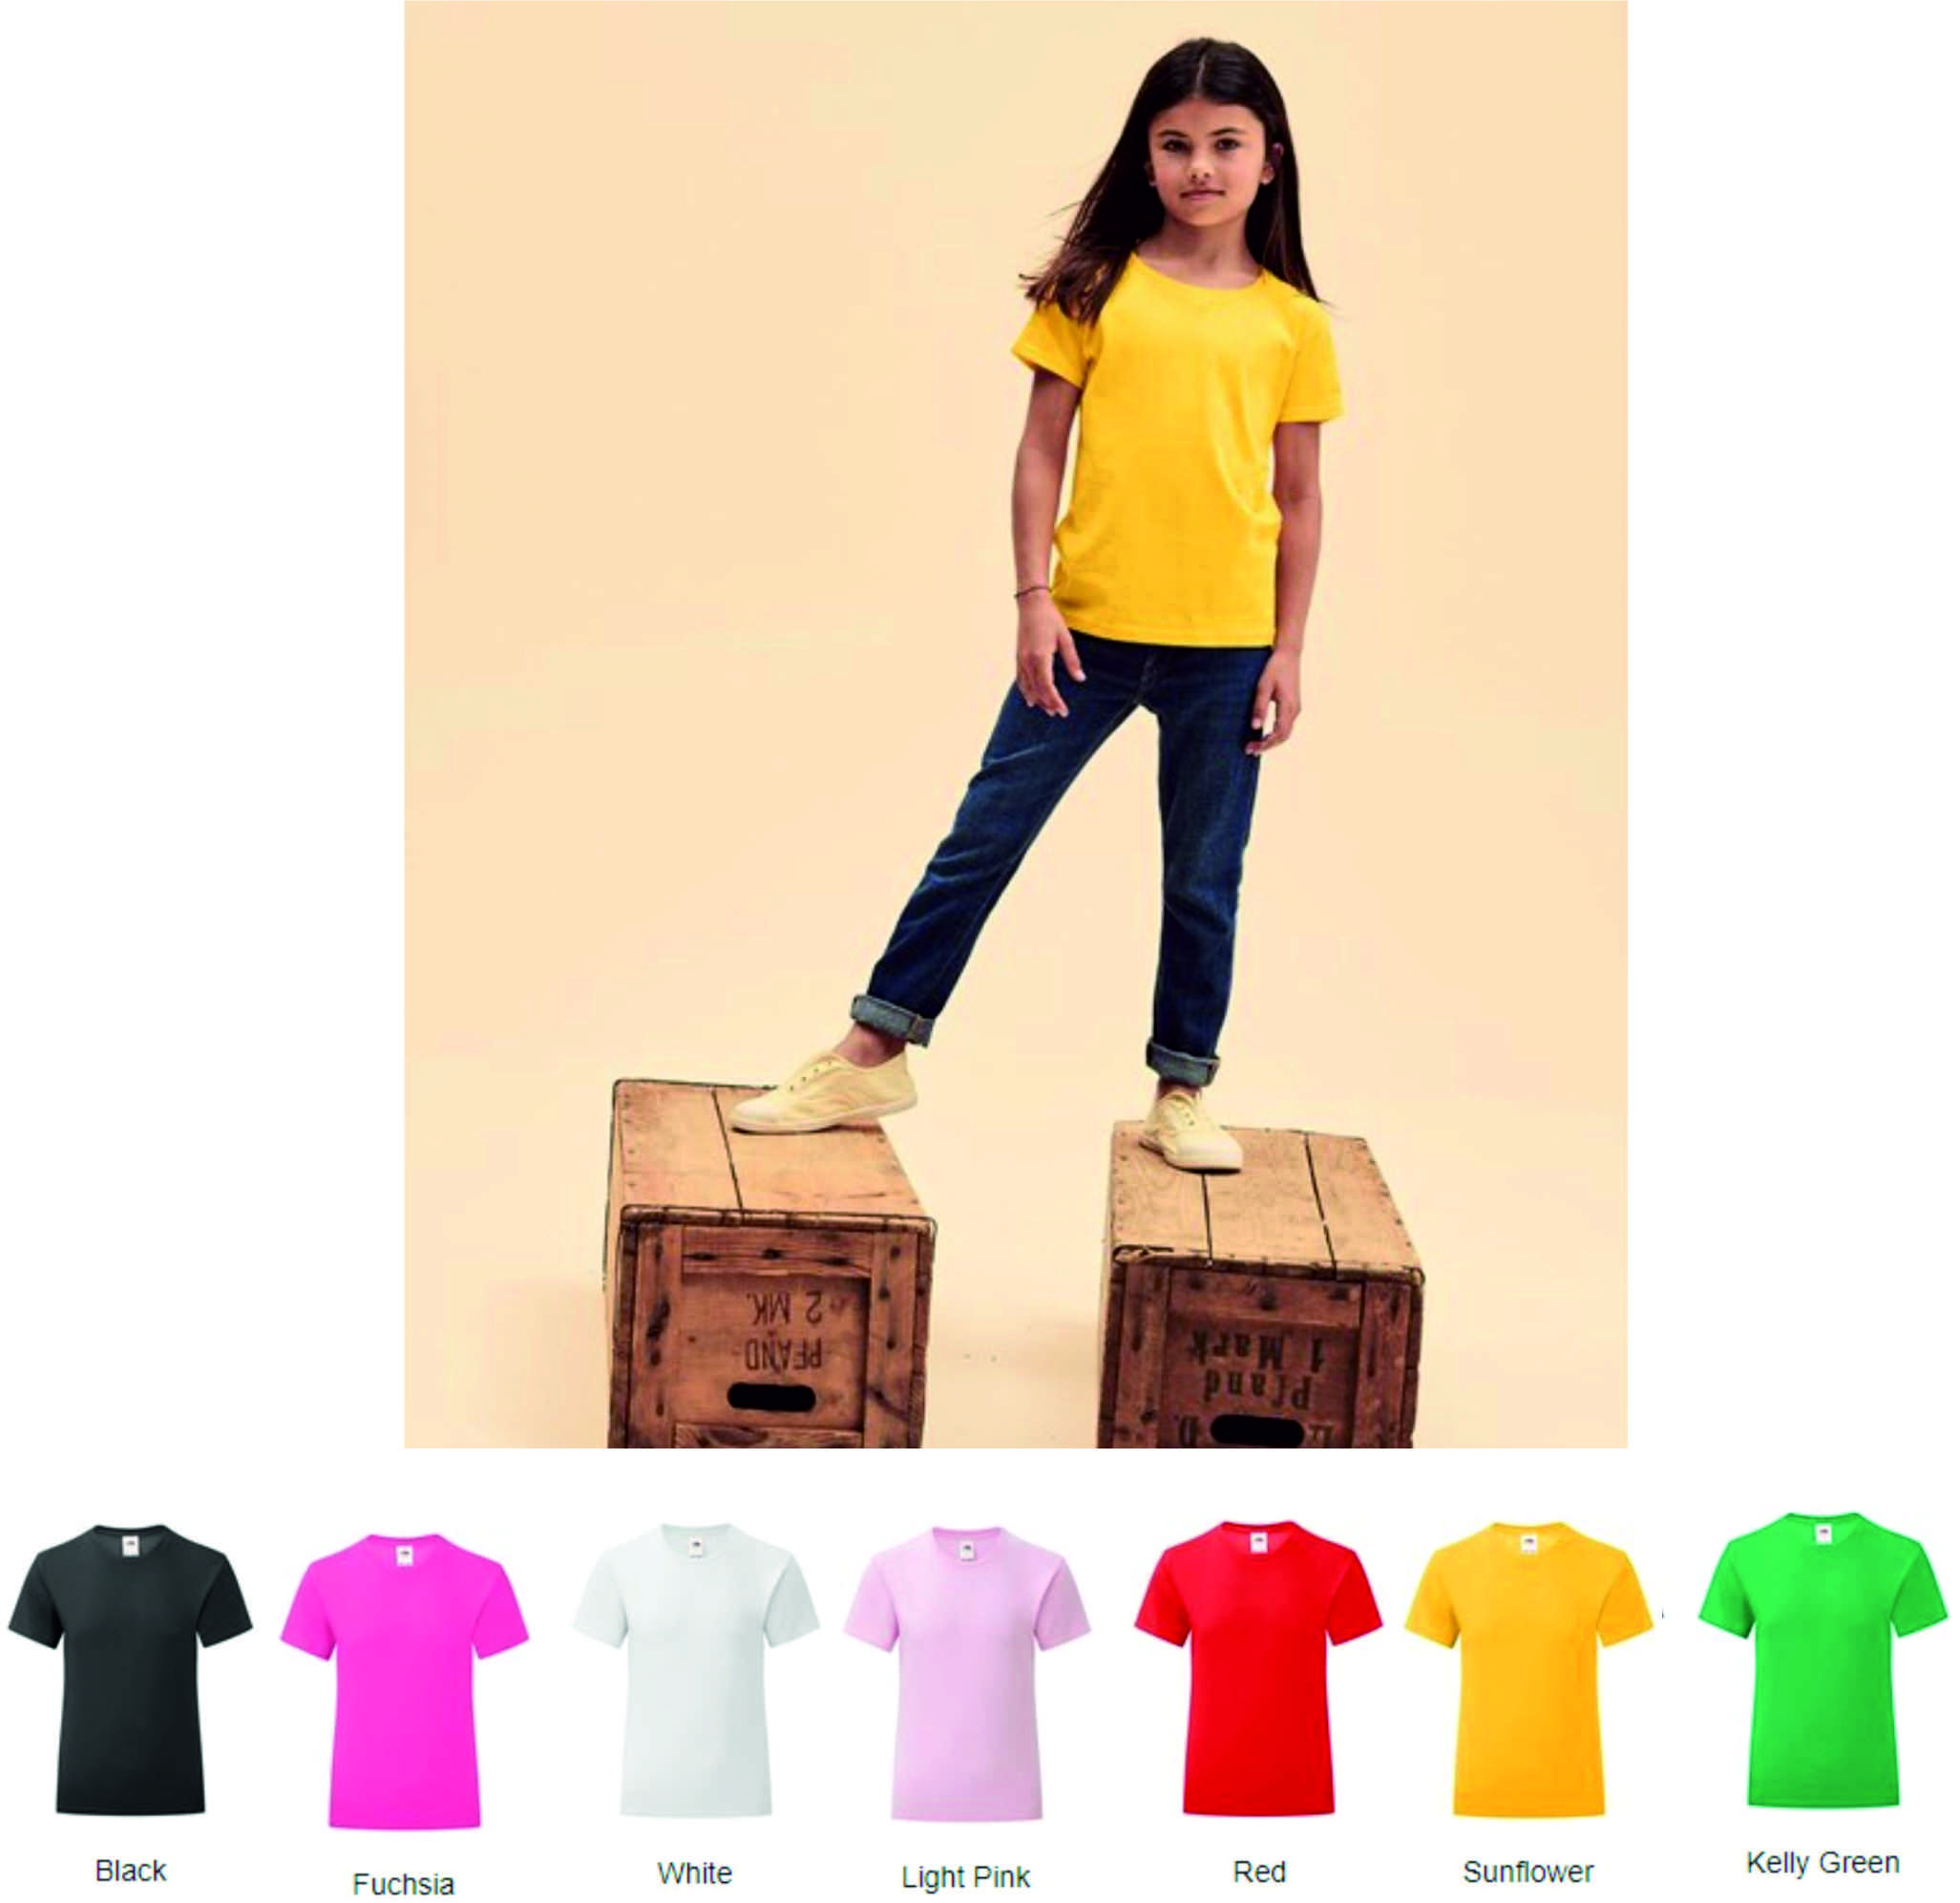 Fruit of the Loom SS151B Girls Iconic Tee Shirt - Click Image to Close